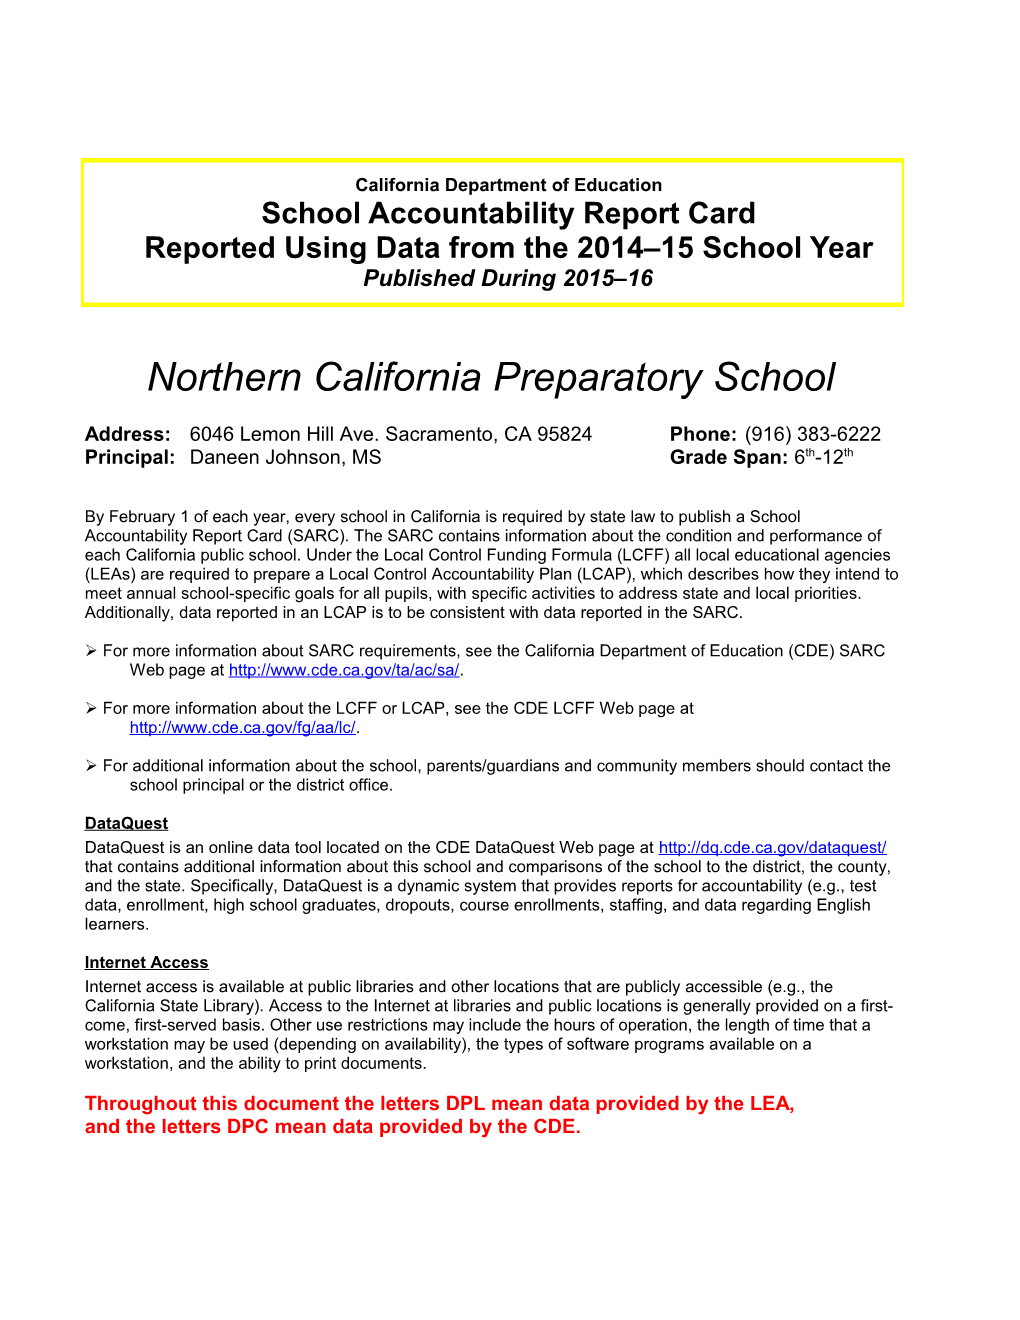 2014-15 SARC Template in Word - School Accountability Report Card (CA Dept of Education)